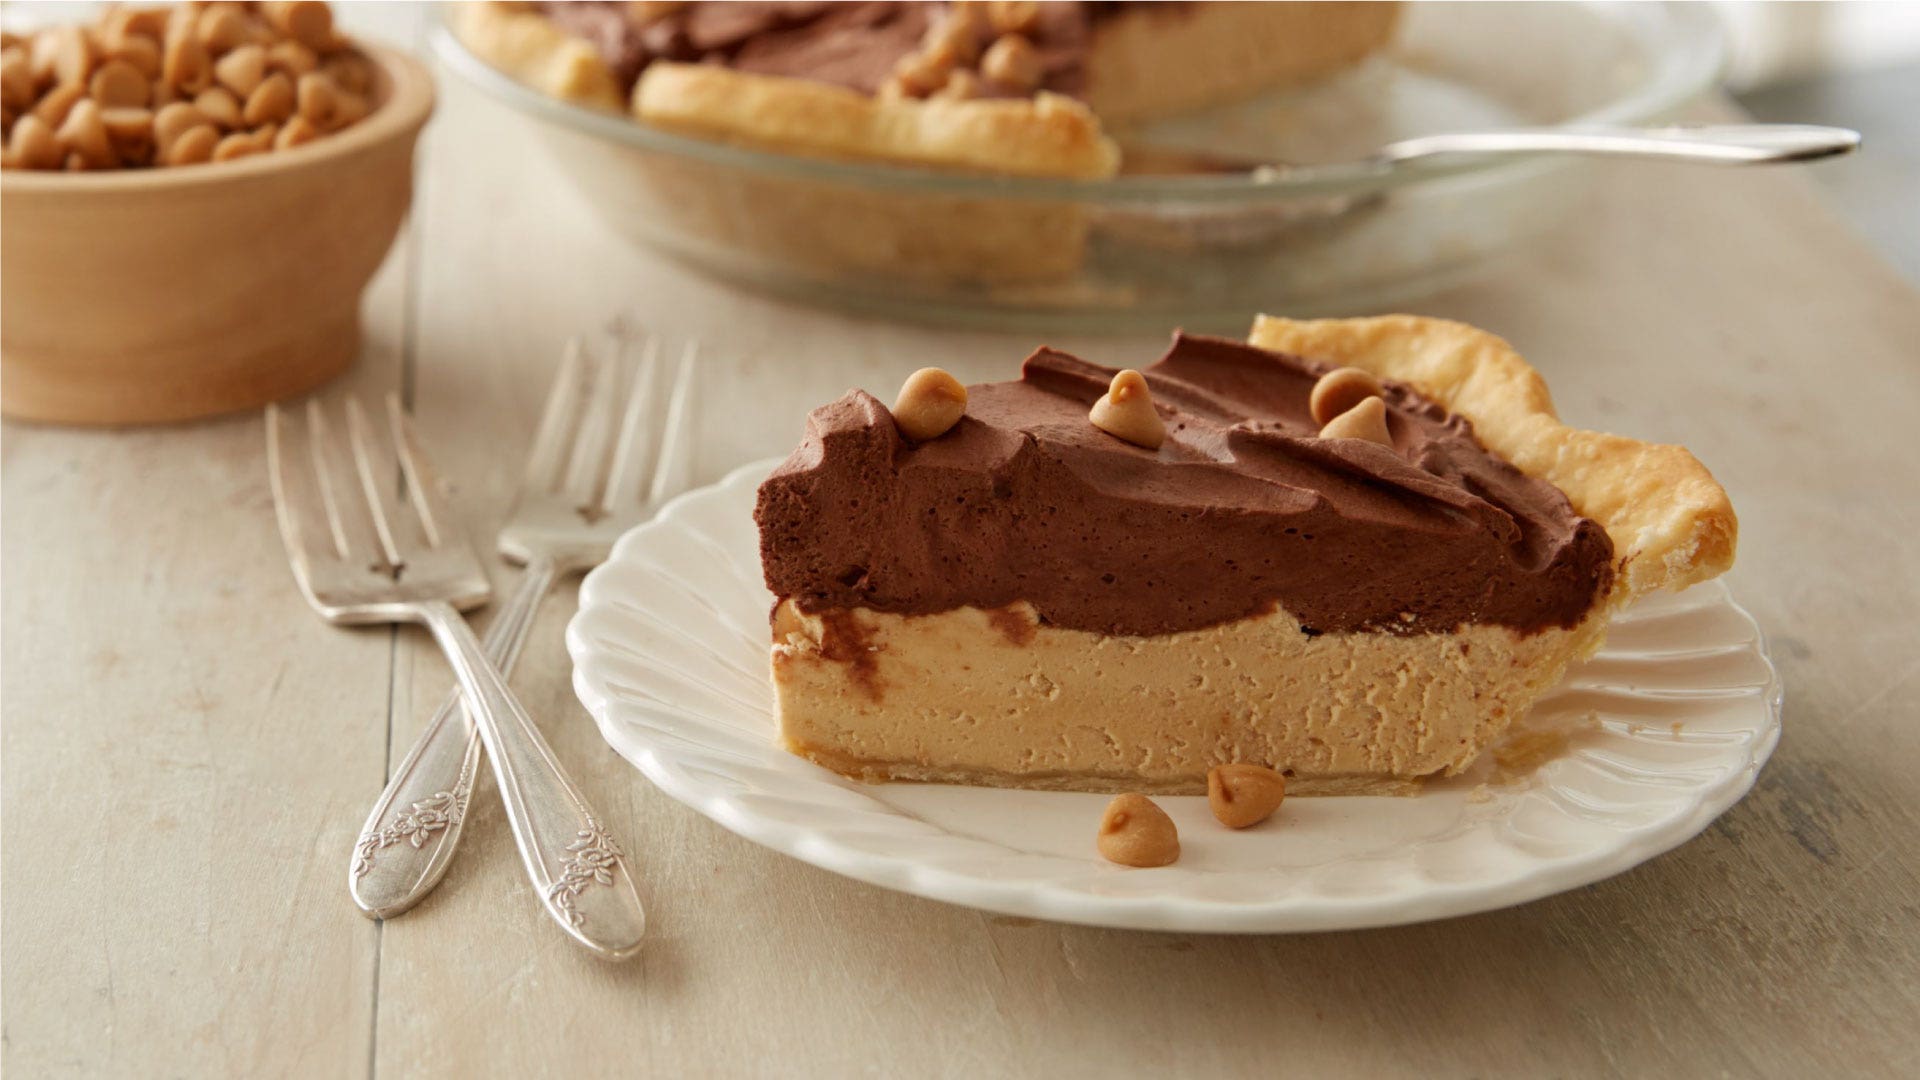 Image of Peanut Butter and Chocolate Mousse Pie